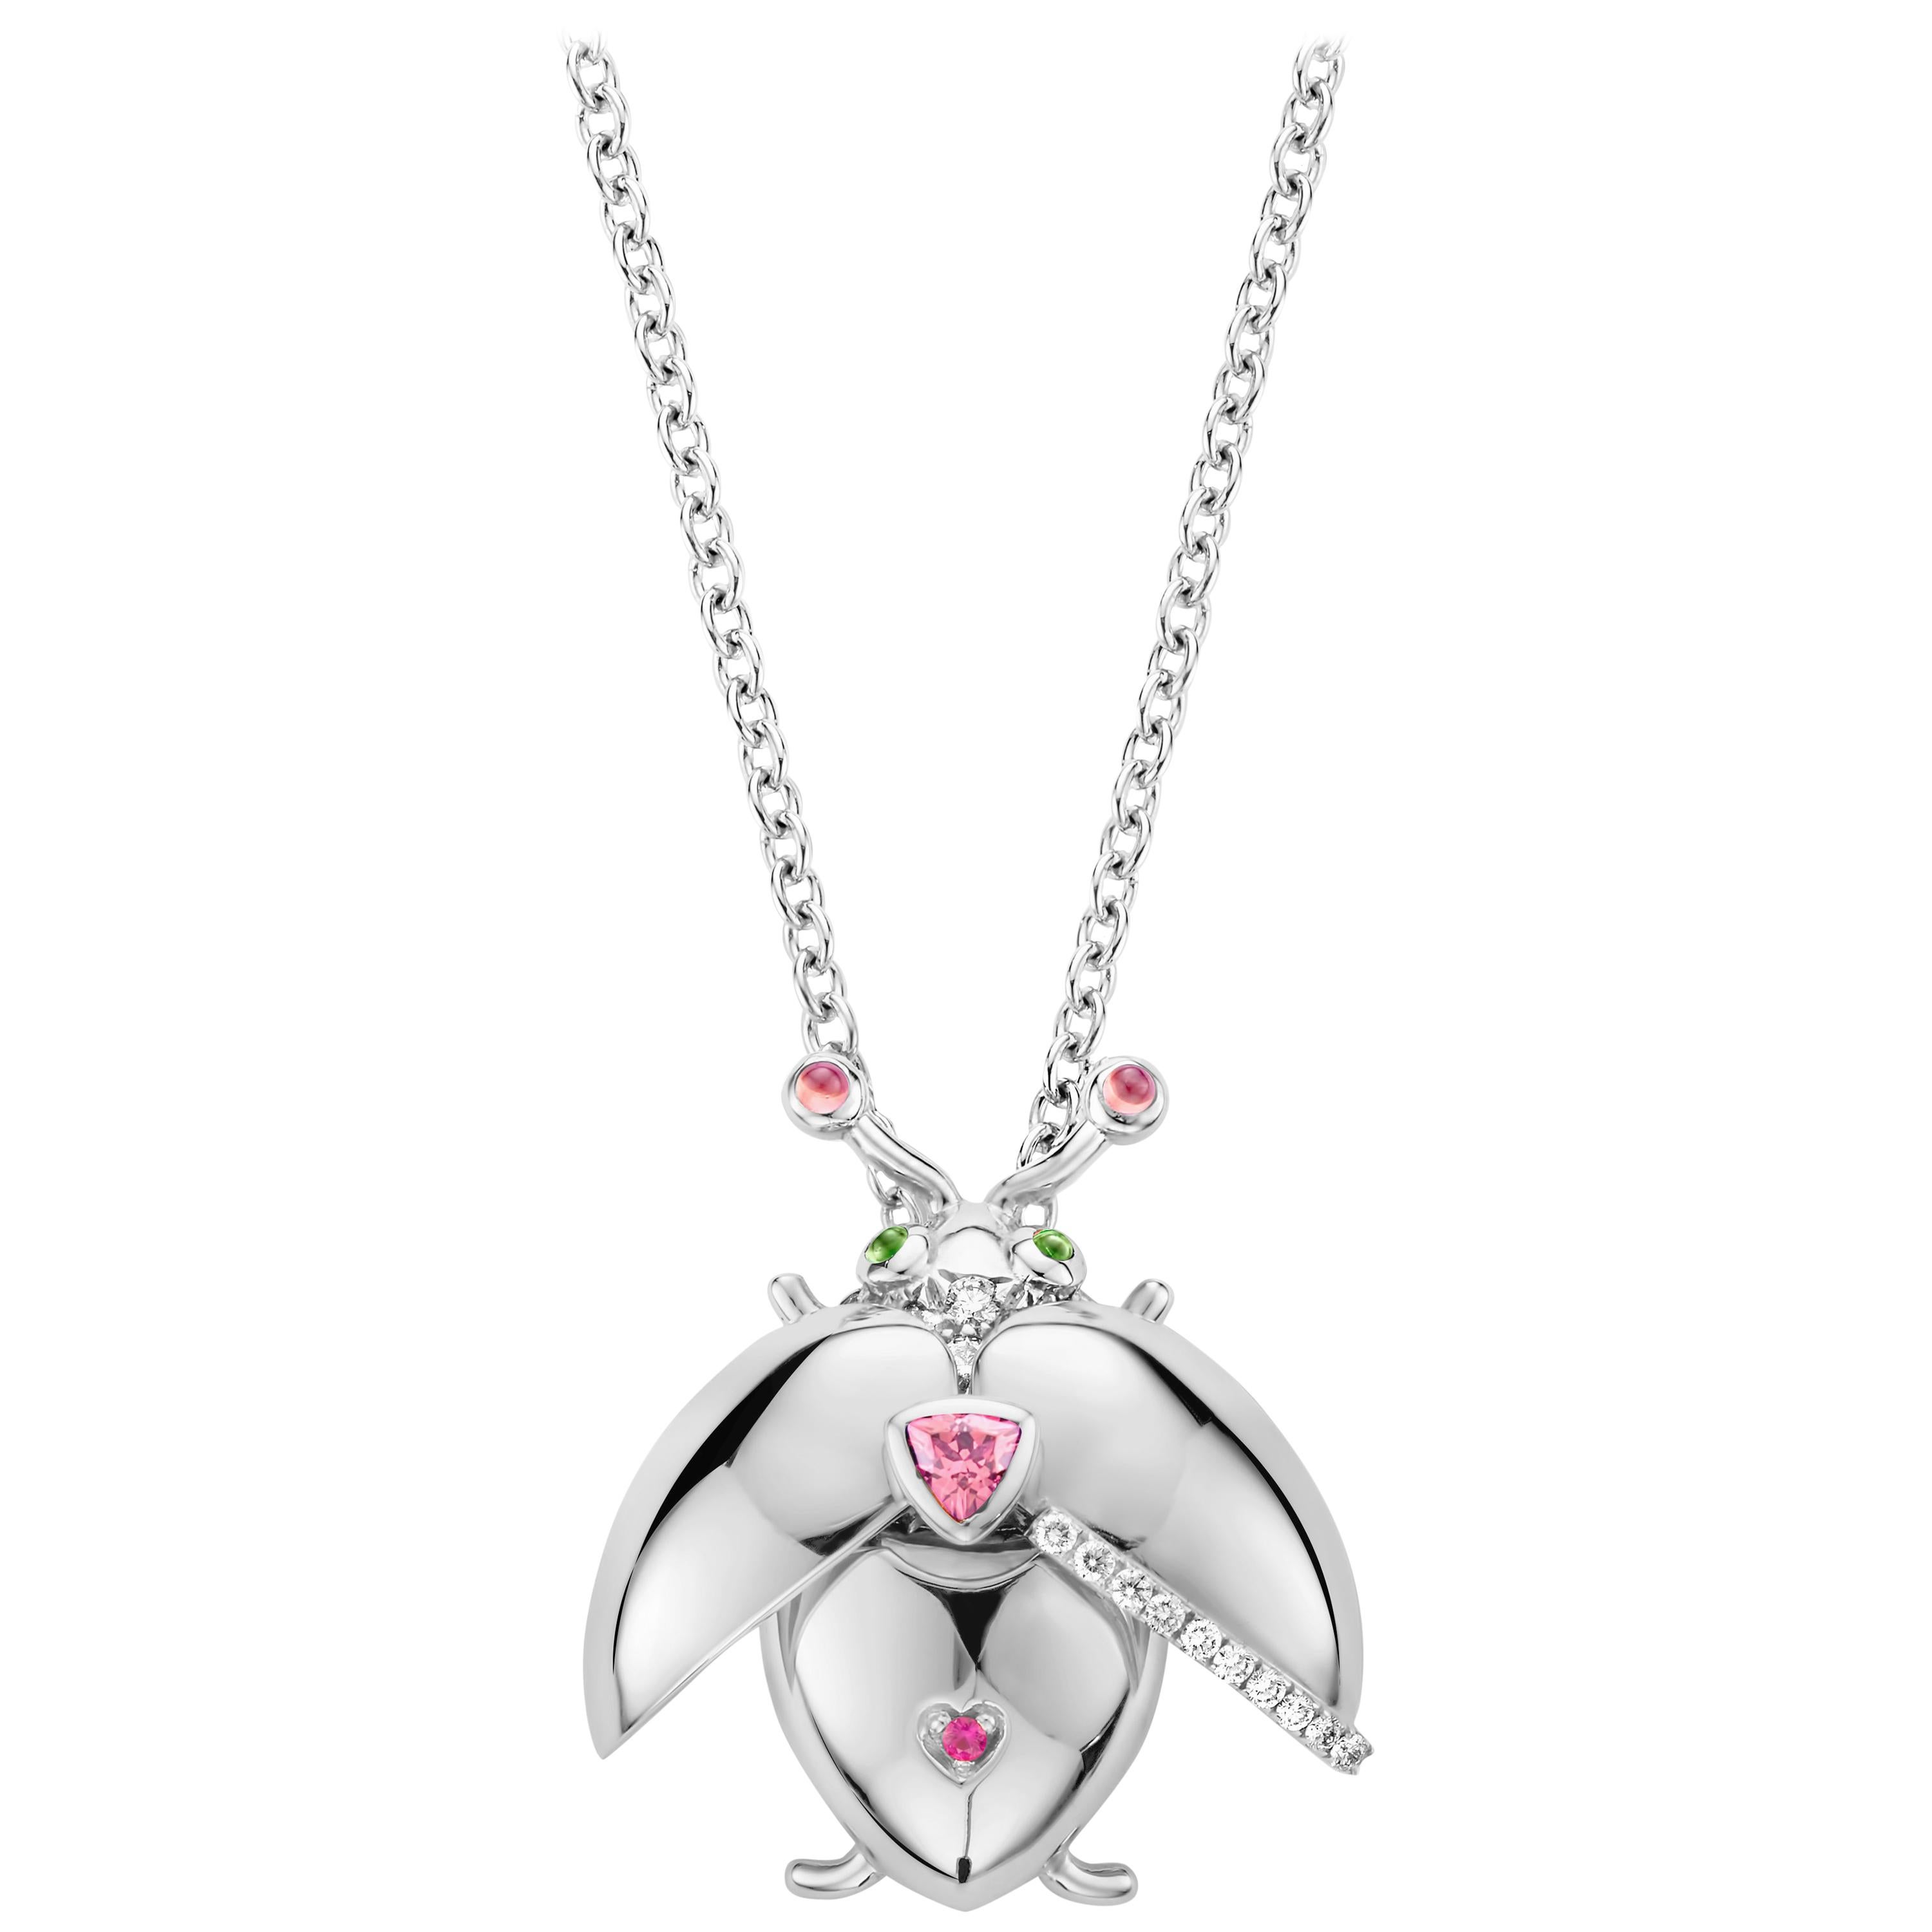 One of a kind lucky beetle necklace in 18K white gold 11g set with the finest diamonds in brilliant cut 0,37Ct (VVS/DEF quality) one natural, pink tourmaline in triangle cut and a pink sapphire in brilliant cut. The feelers and the eyes are set with